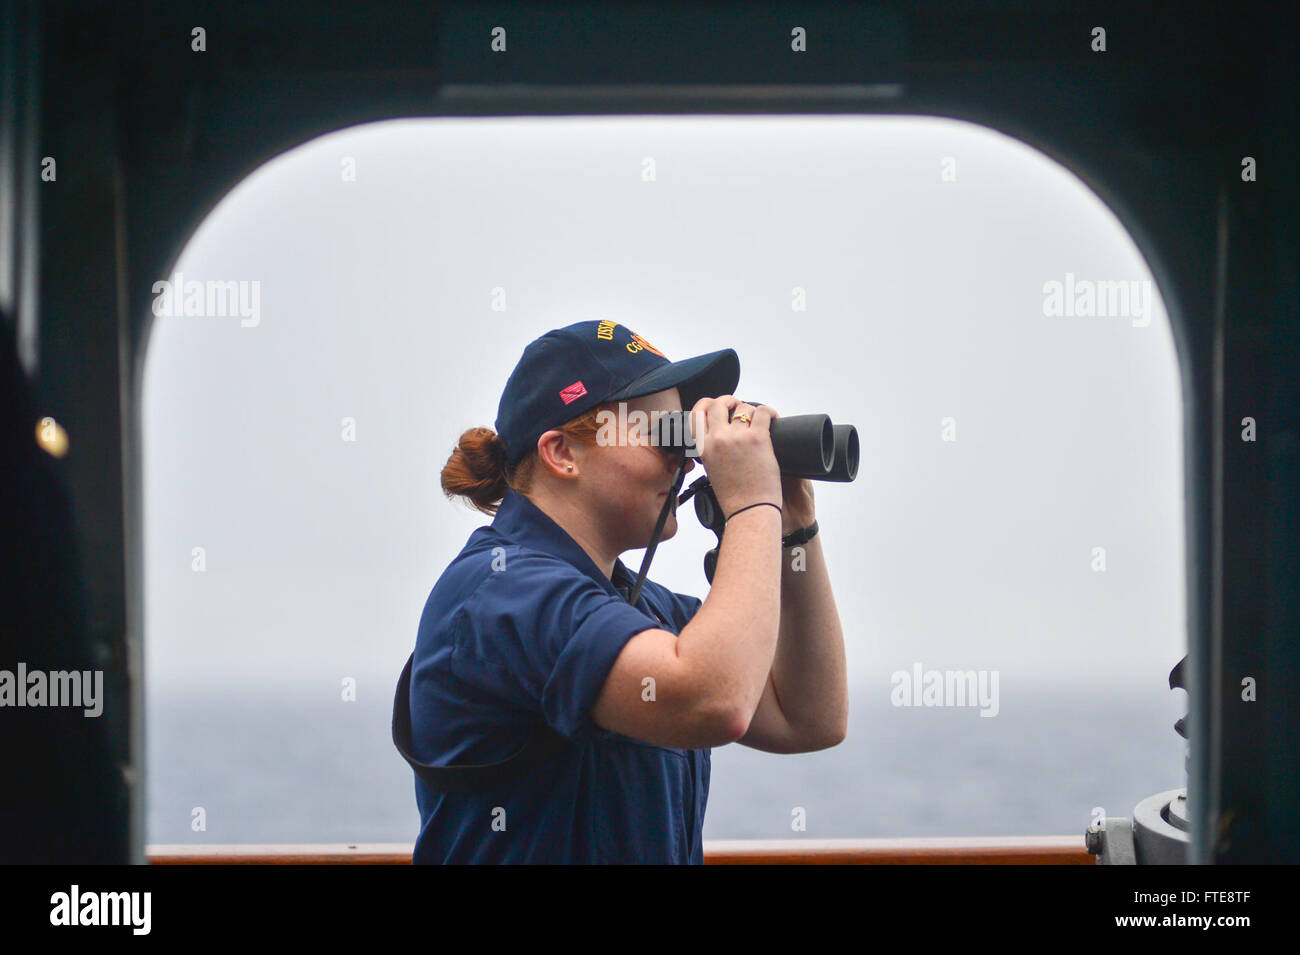 131227-N-QL471-286: ATLANTIC OCEAN (Dec. 27, 2013) - Ensign Stephanie Gies looks for contacts as the guided-missile cruiser USS Monterey (CG 61) transits the Atlantic Ocean. Monterey is scheduled to return to homeport in Norfolk after a nine-month deployment to the U.S. 5th and 6th Fleet areas of operations. (U.S. Navy photo by Mass Communication Specialist 2nd Class Billy Ho/Released) Stock Photo